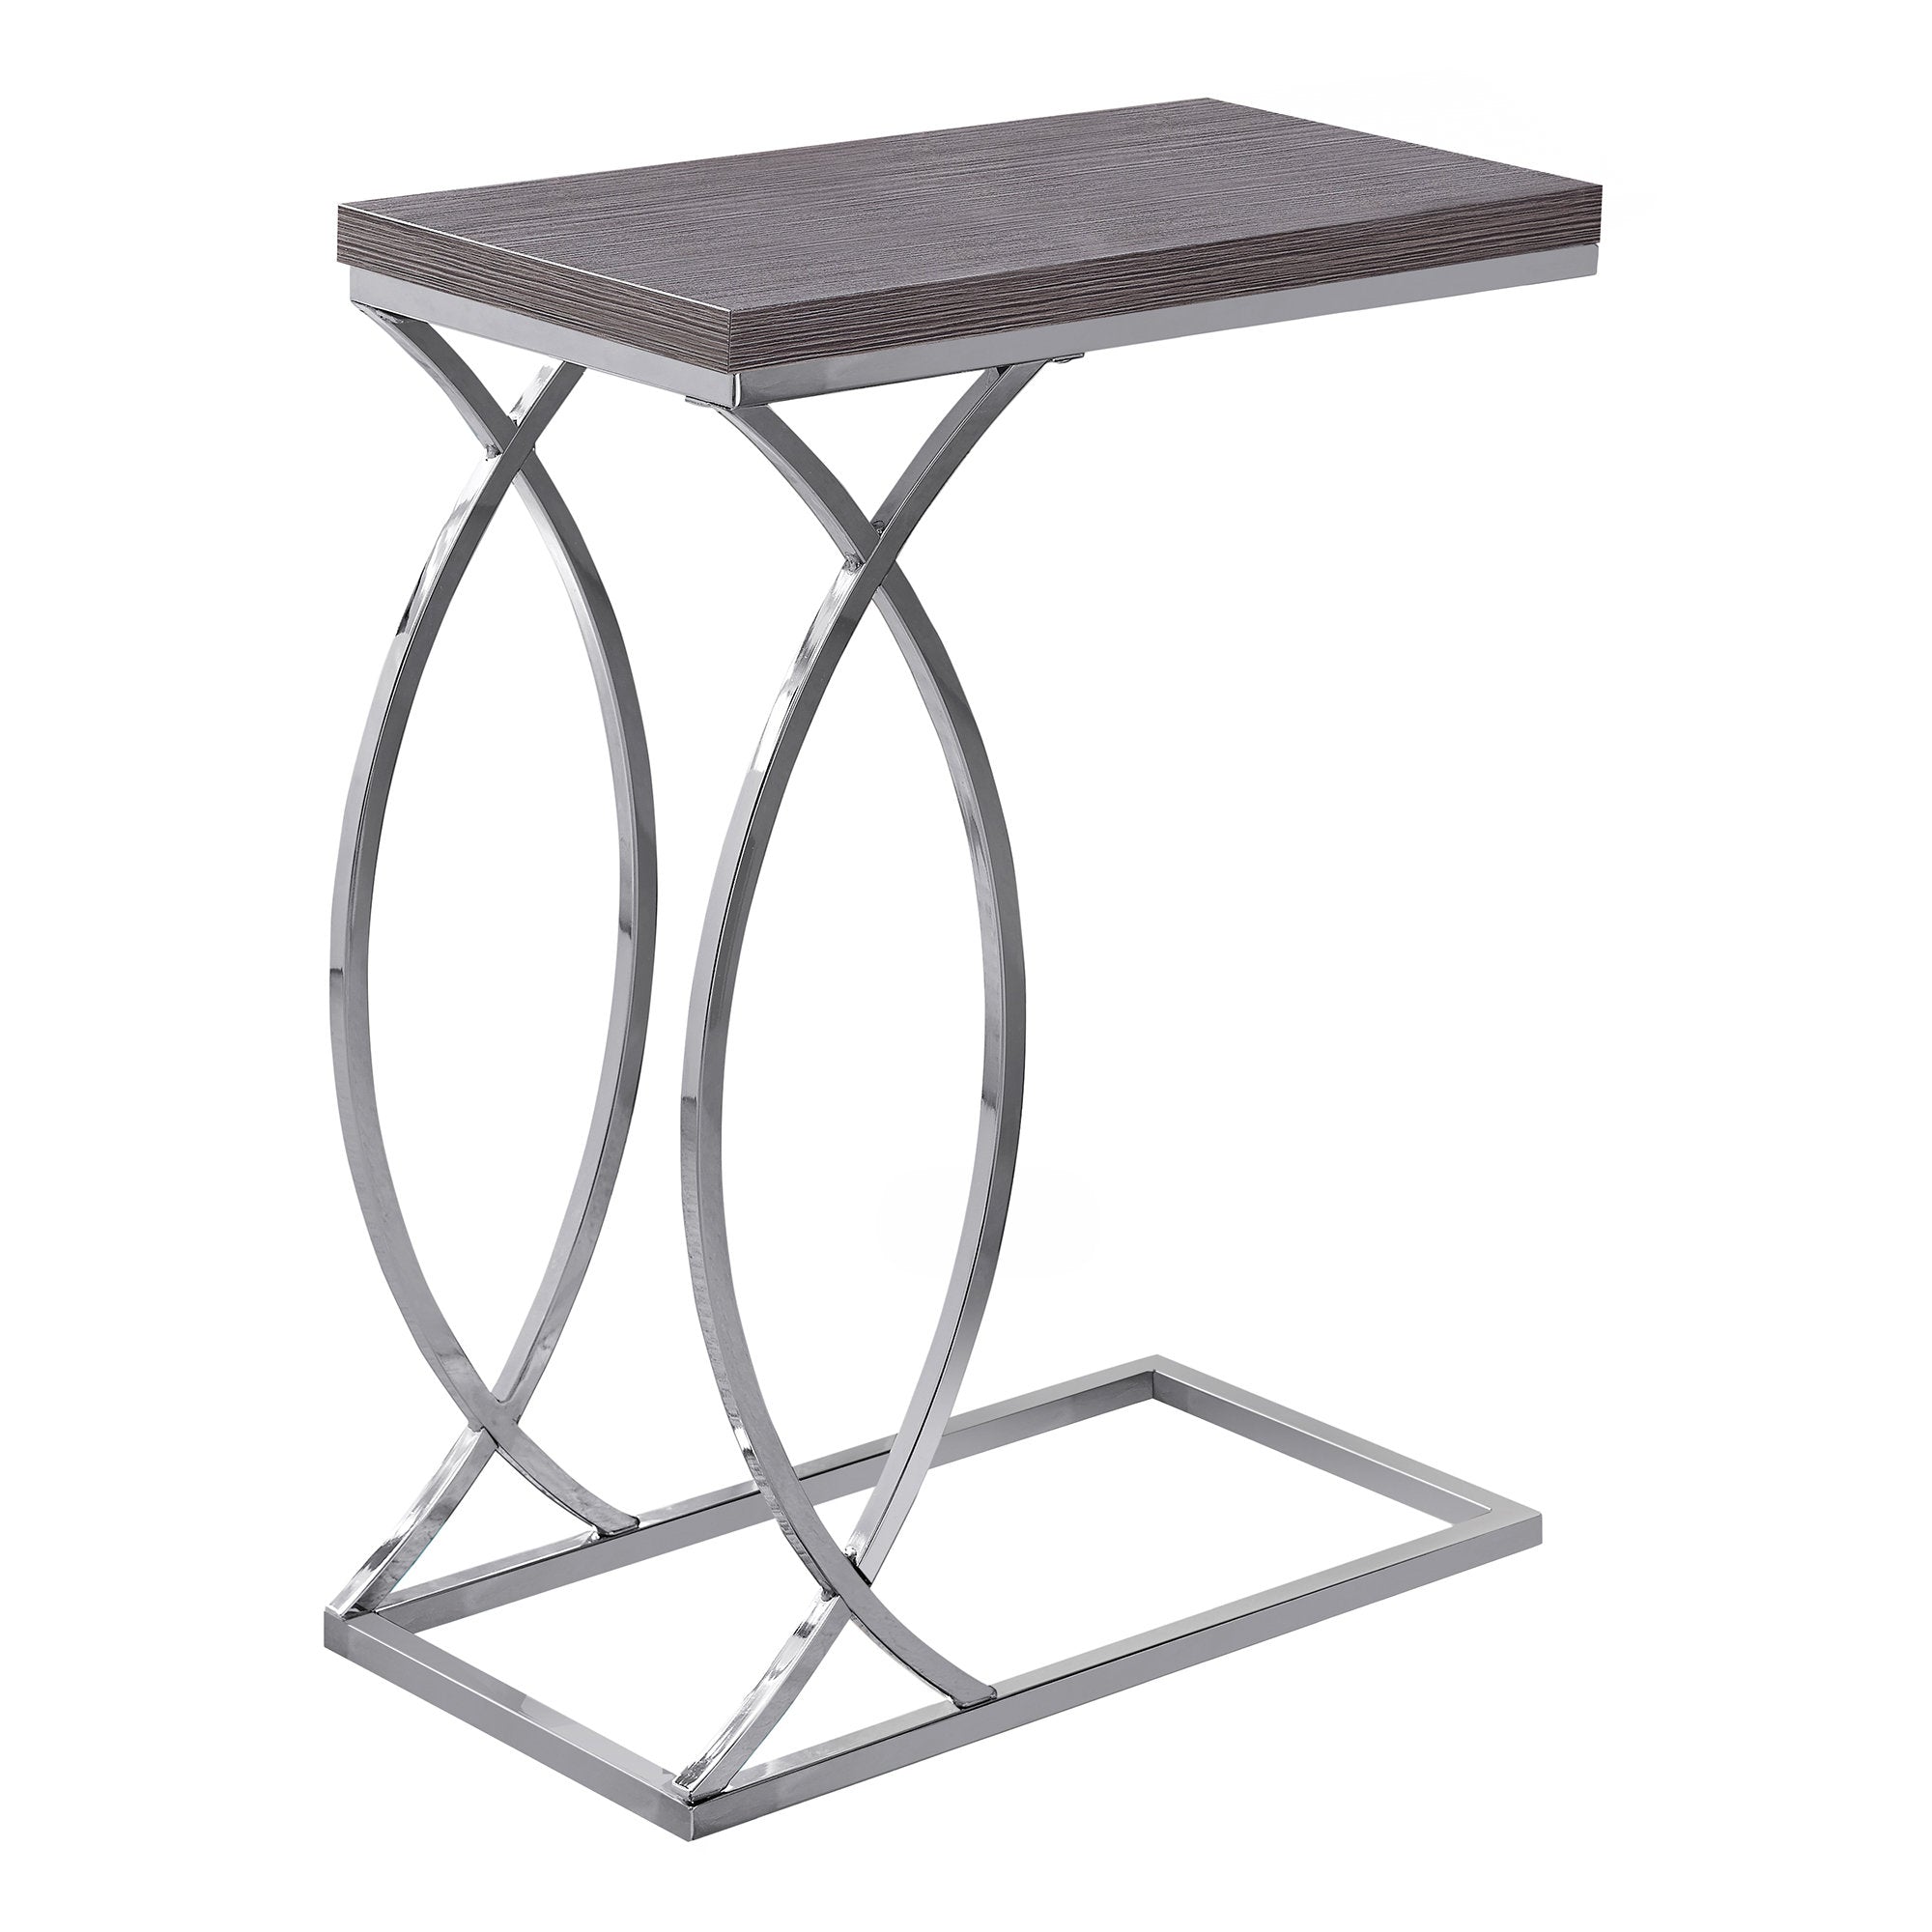 MN-633187    Accent Table, C-Shaped, End, Side, Snack, Living Room, Bedroom, Metal Legs, Laminate, Grey, Chrome, Contemporary, Modern